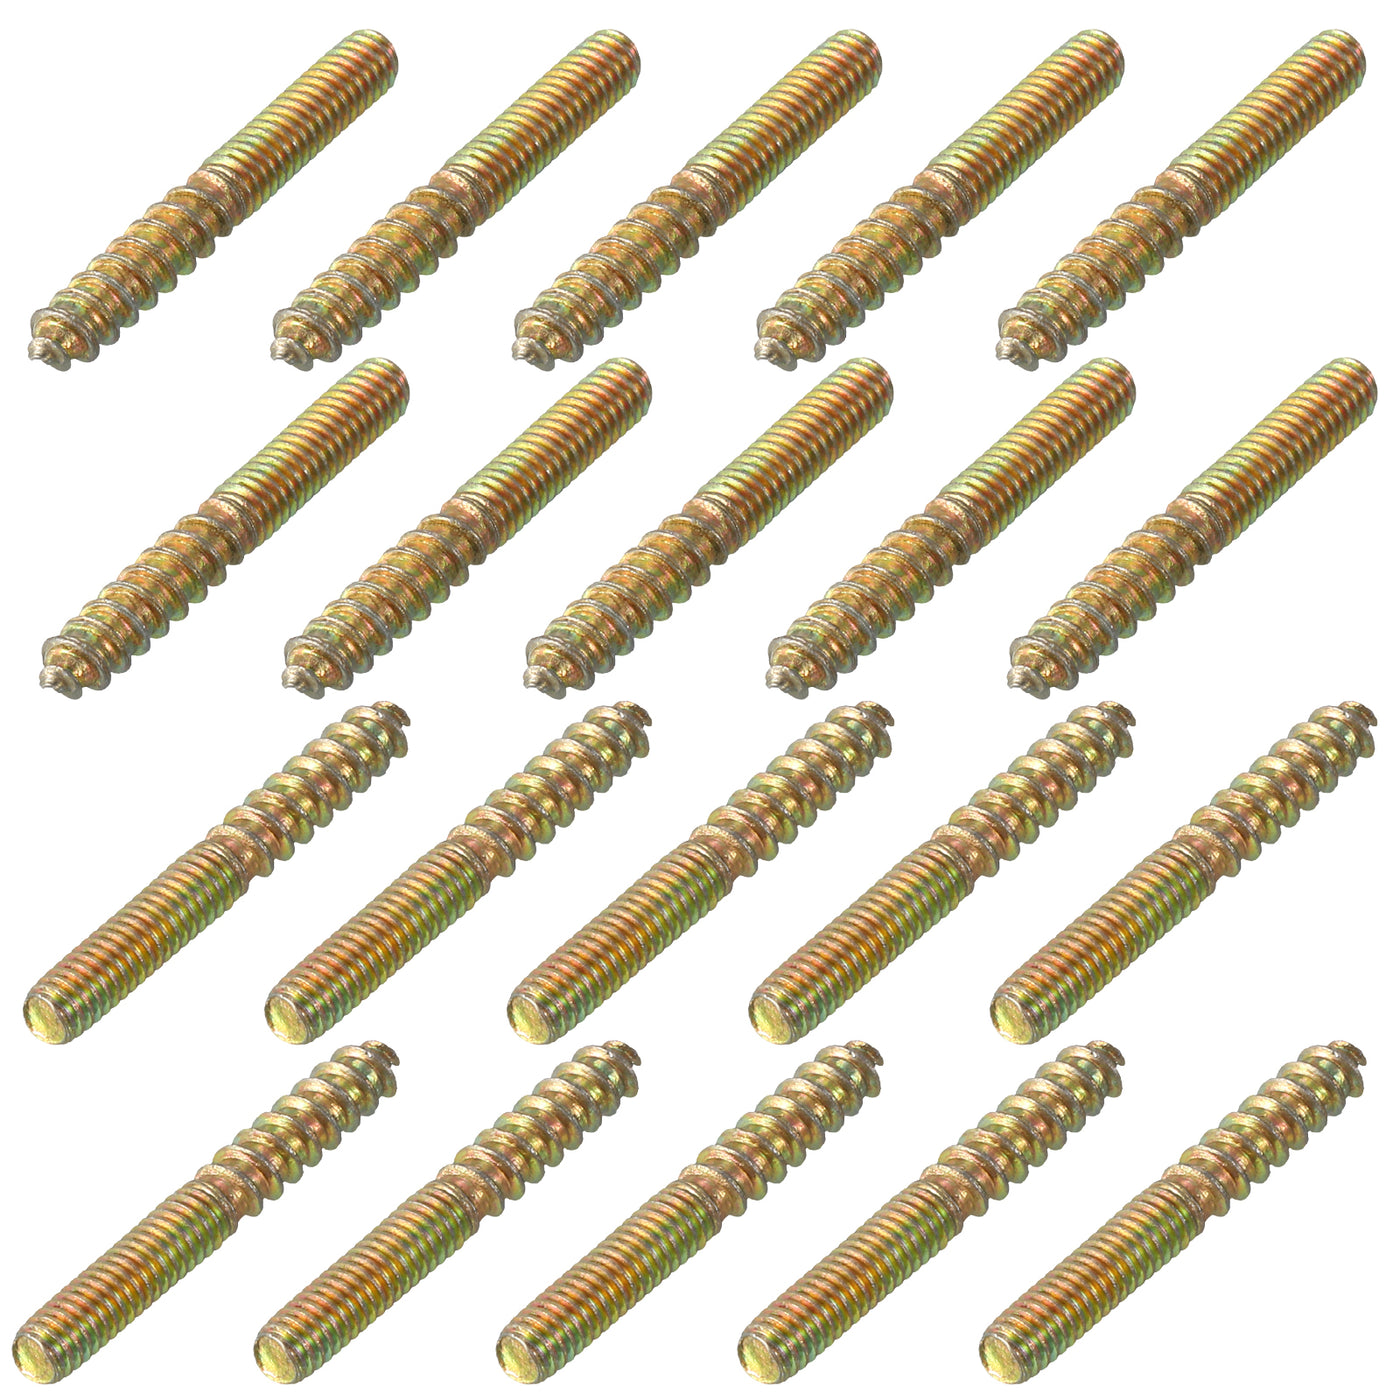 uxcell Uxcell 60Pcs M4x30mm Hanger Bolt Double Headed Bolt Self-Tapping Screw for Furniture